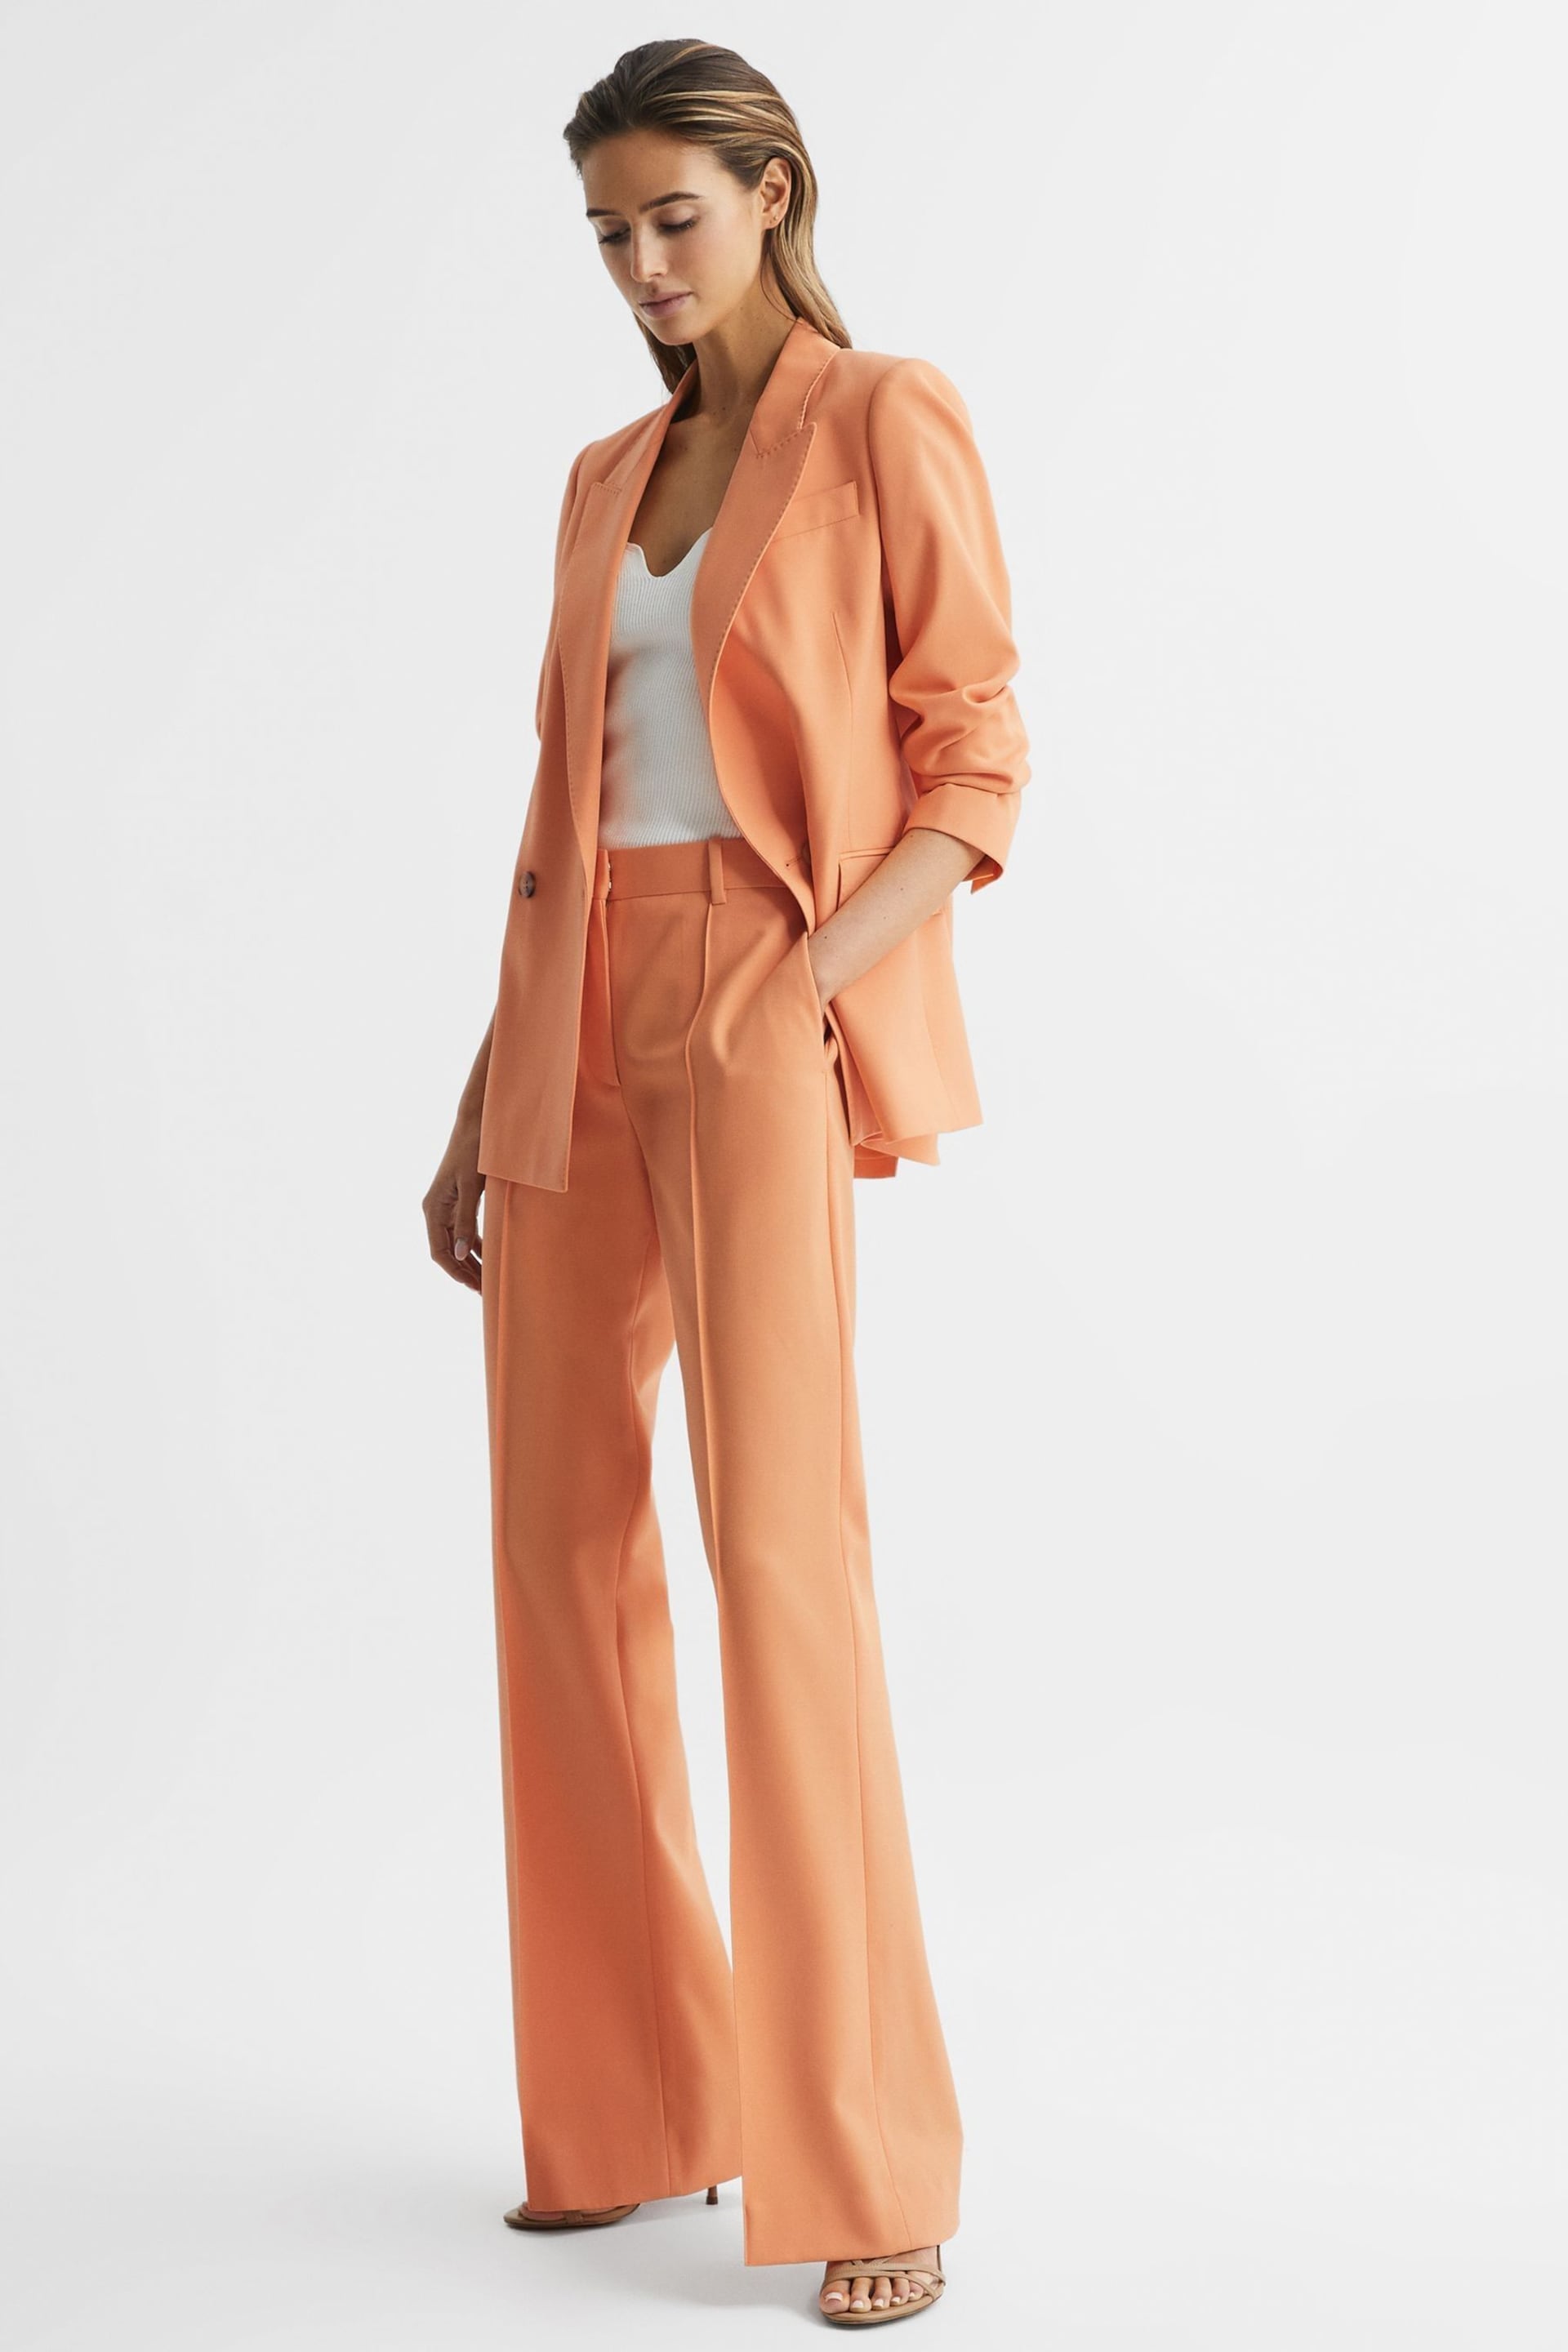 Reiss Orange Emmy Wide Leg Tailored Trousers - Image 1 of 7